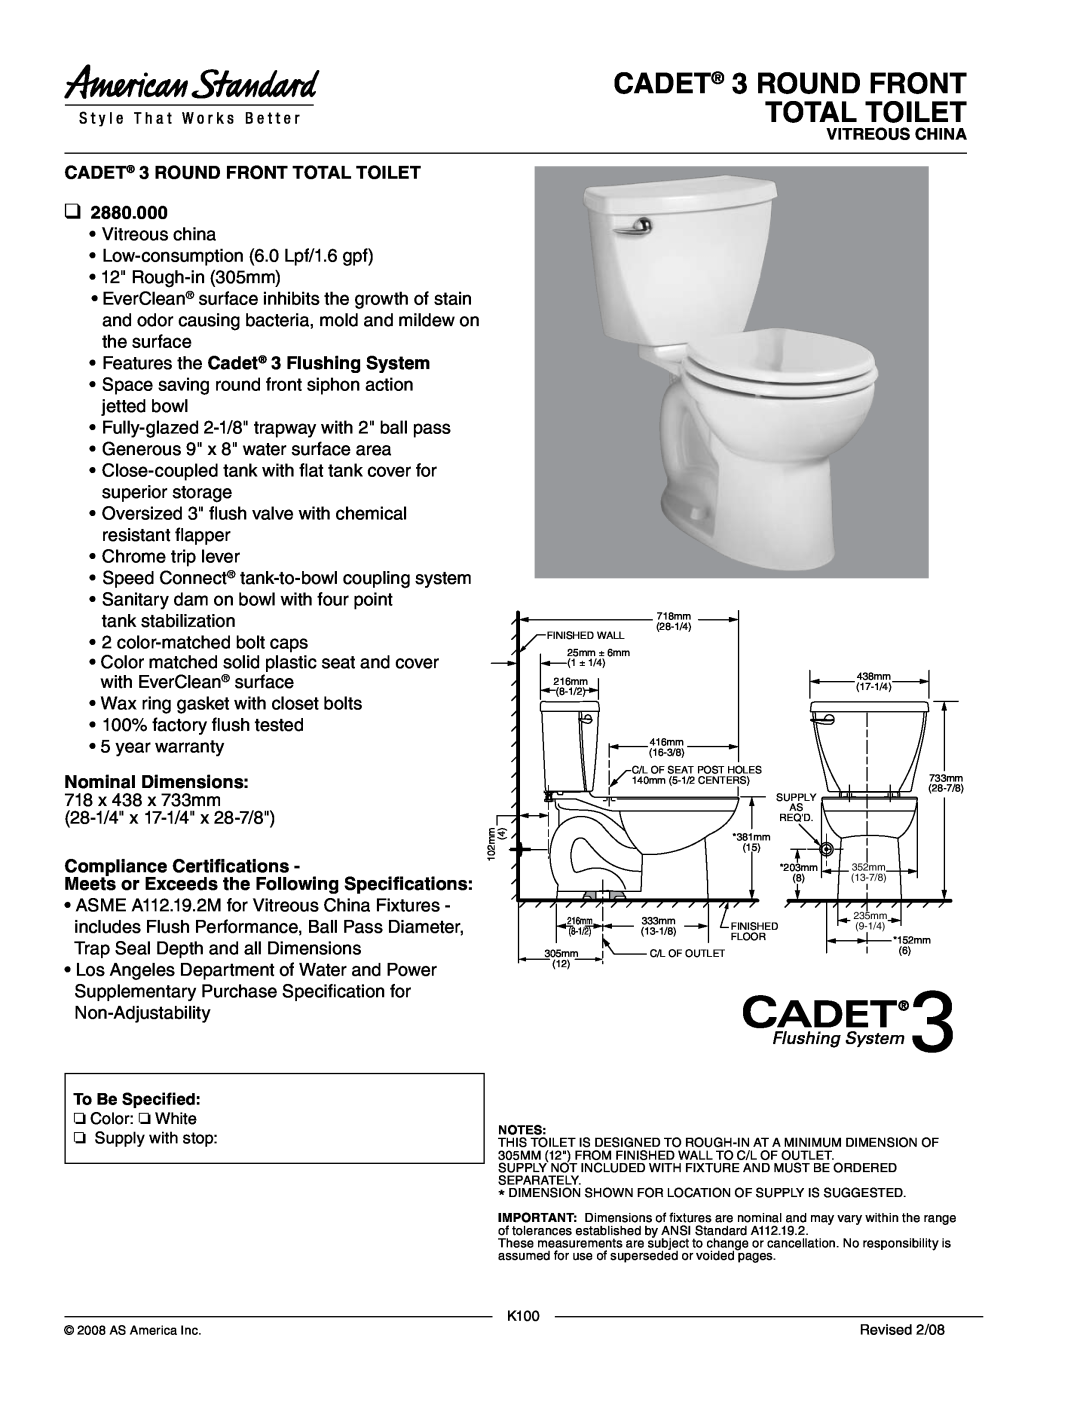 American Standard 2880.000 dimensions CADET 3 ROUND FRONT TOTAL Toilet, CADET 3 ROUND FRONT TOTAL TOILET 